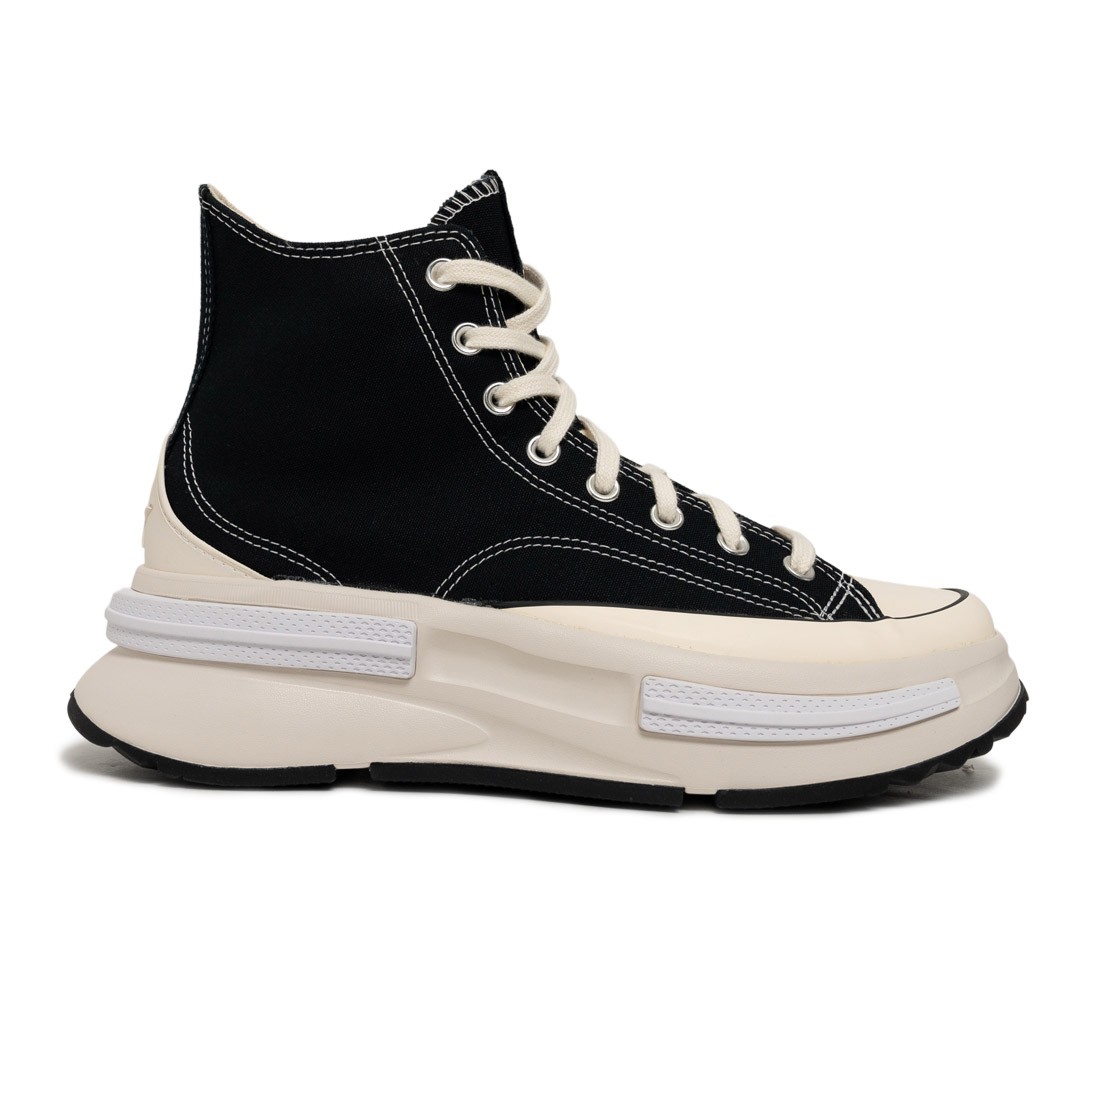 converse all star modern introductory colorways